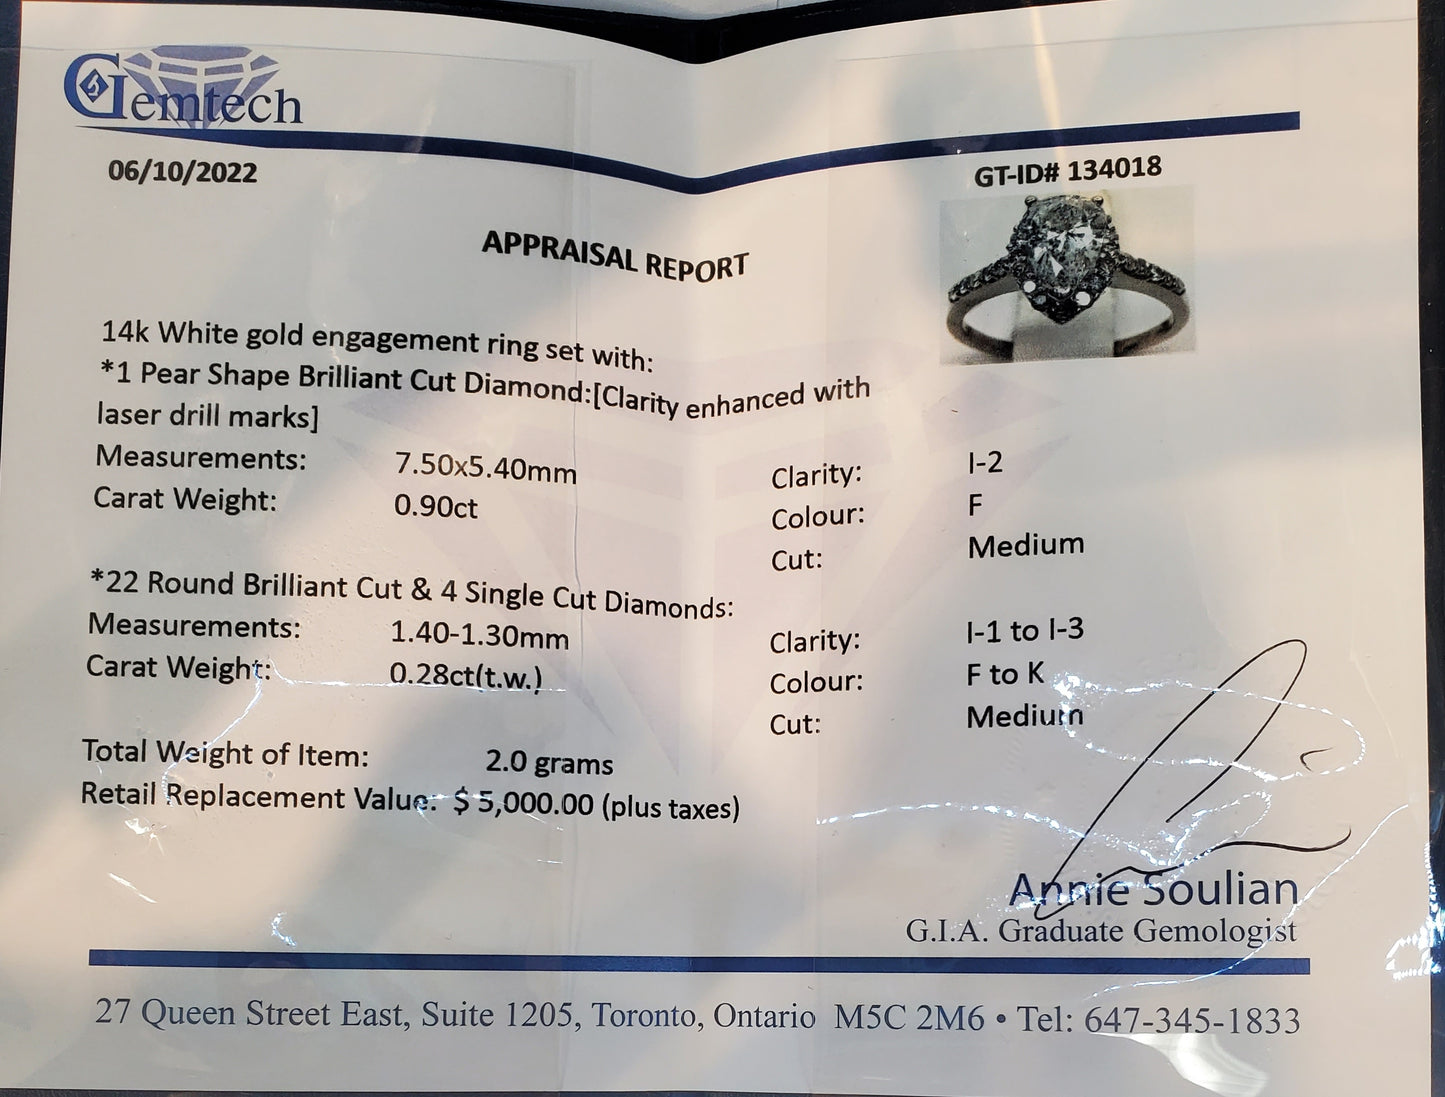 #4921 diamond engagement ring appraised at